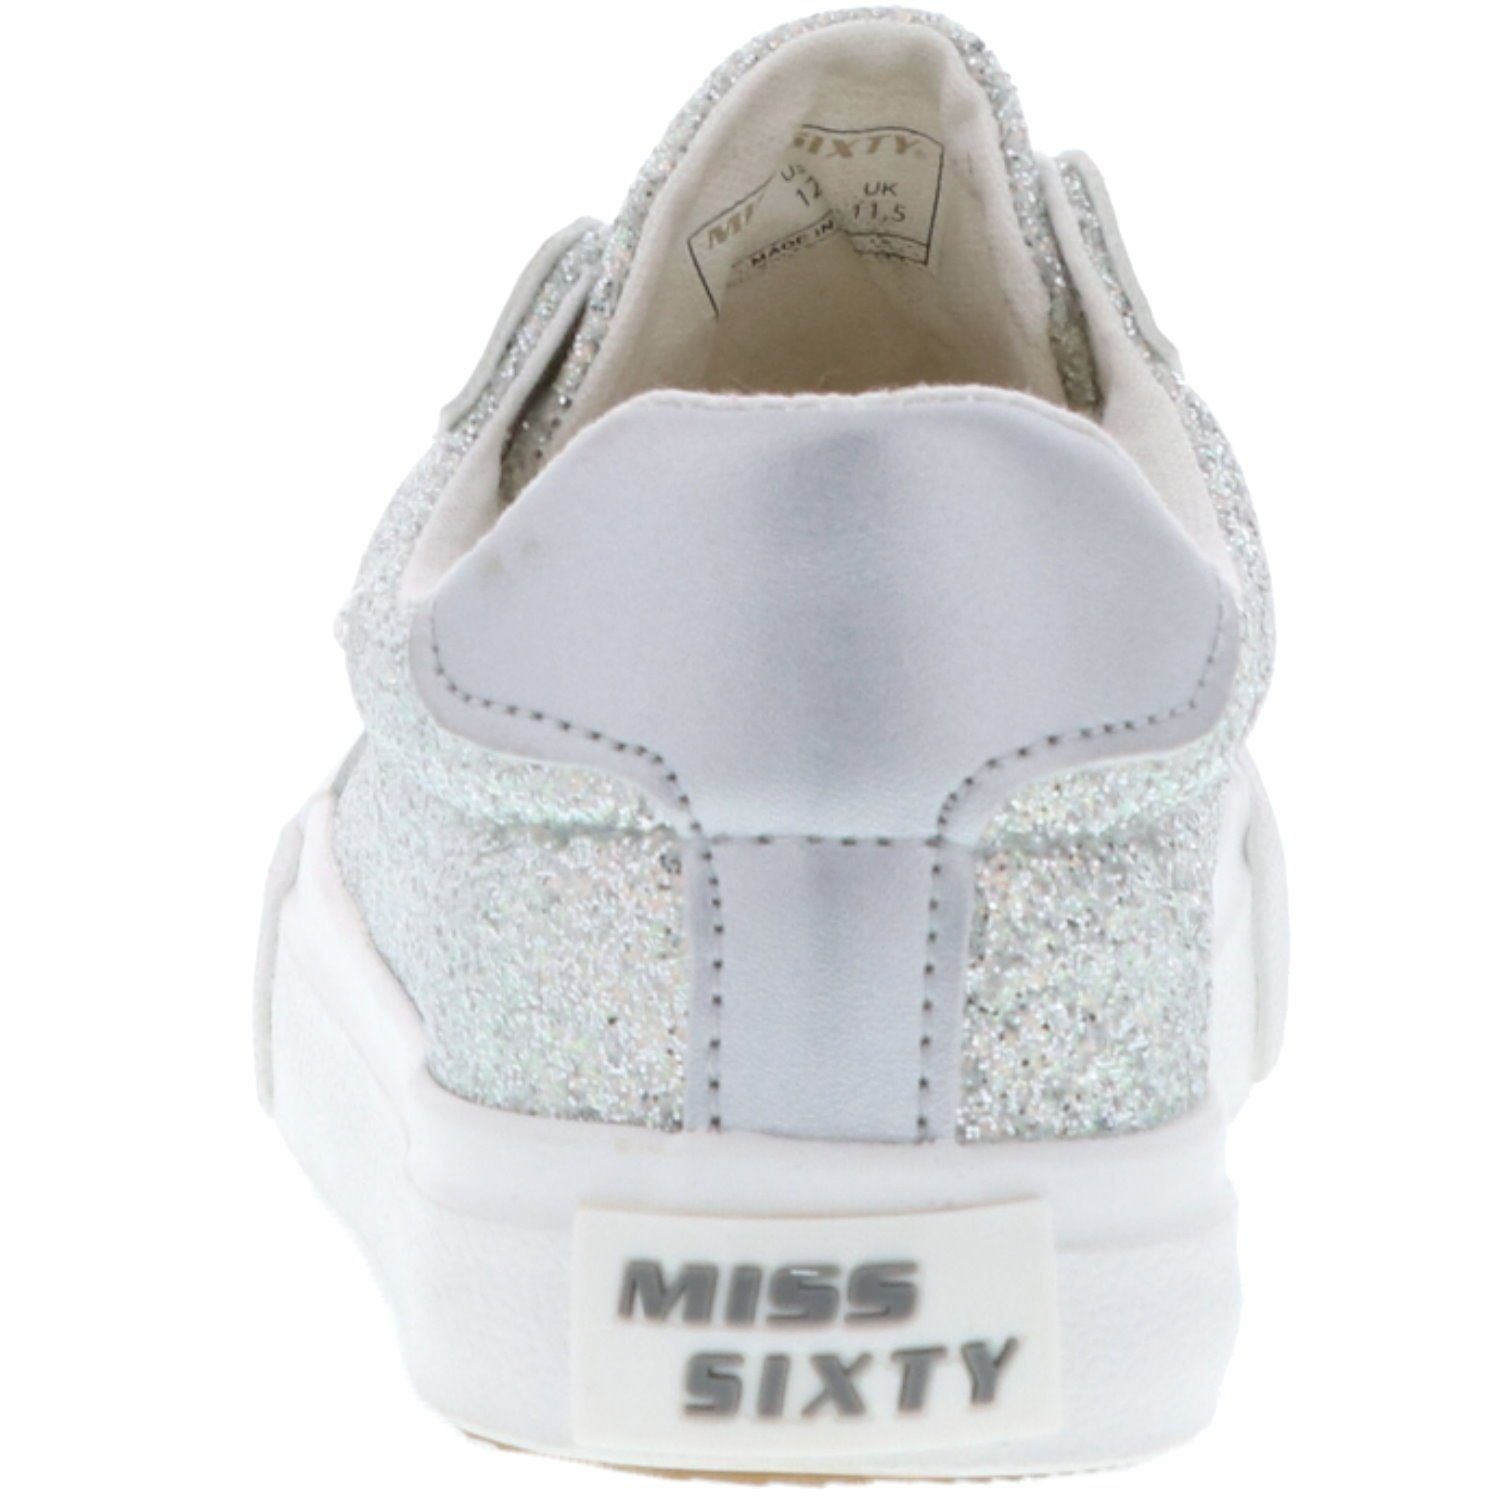 60 Ver.:150 MISS SIXTY 522 MS Silver S19 S19-SMS522 /S Schnürschuh